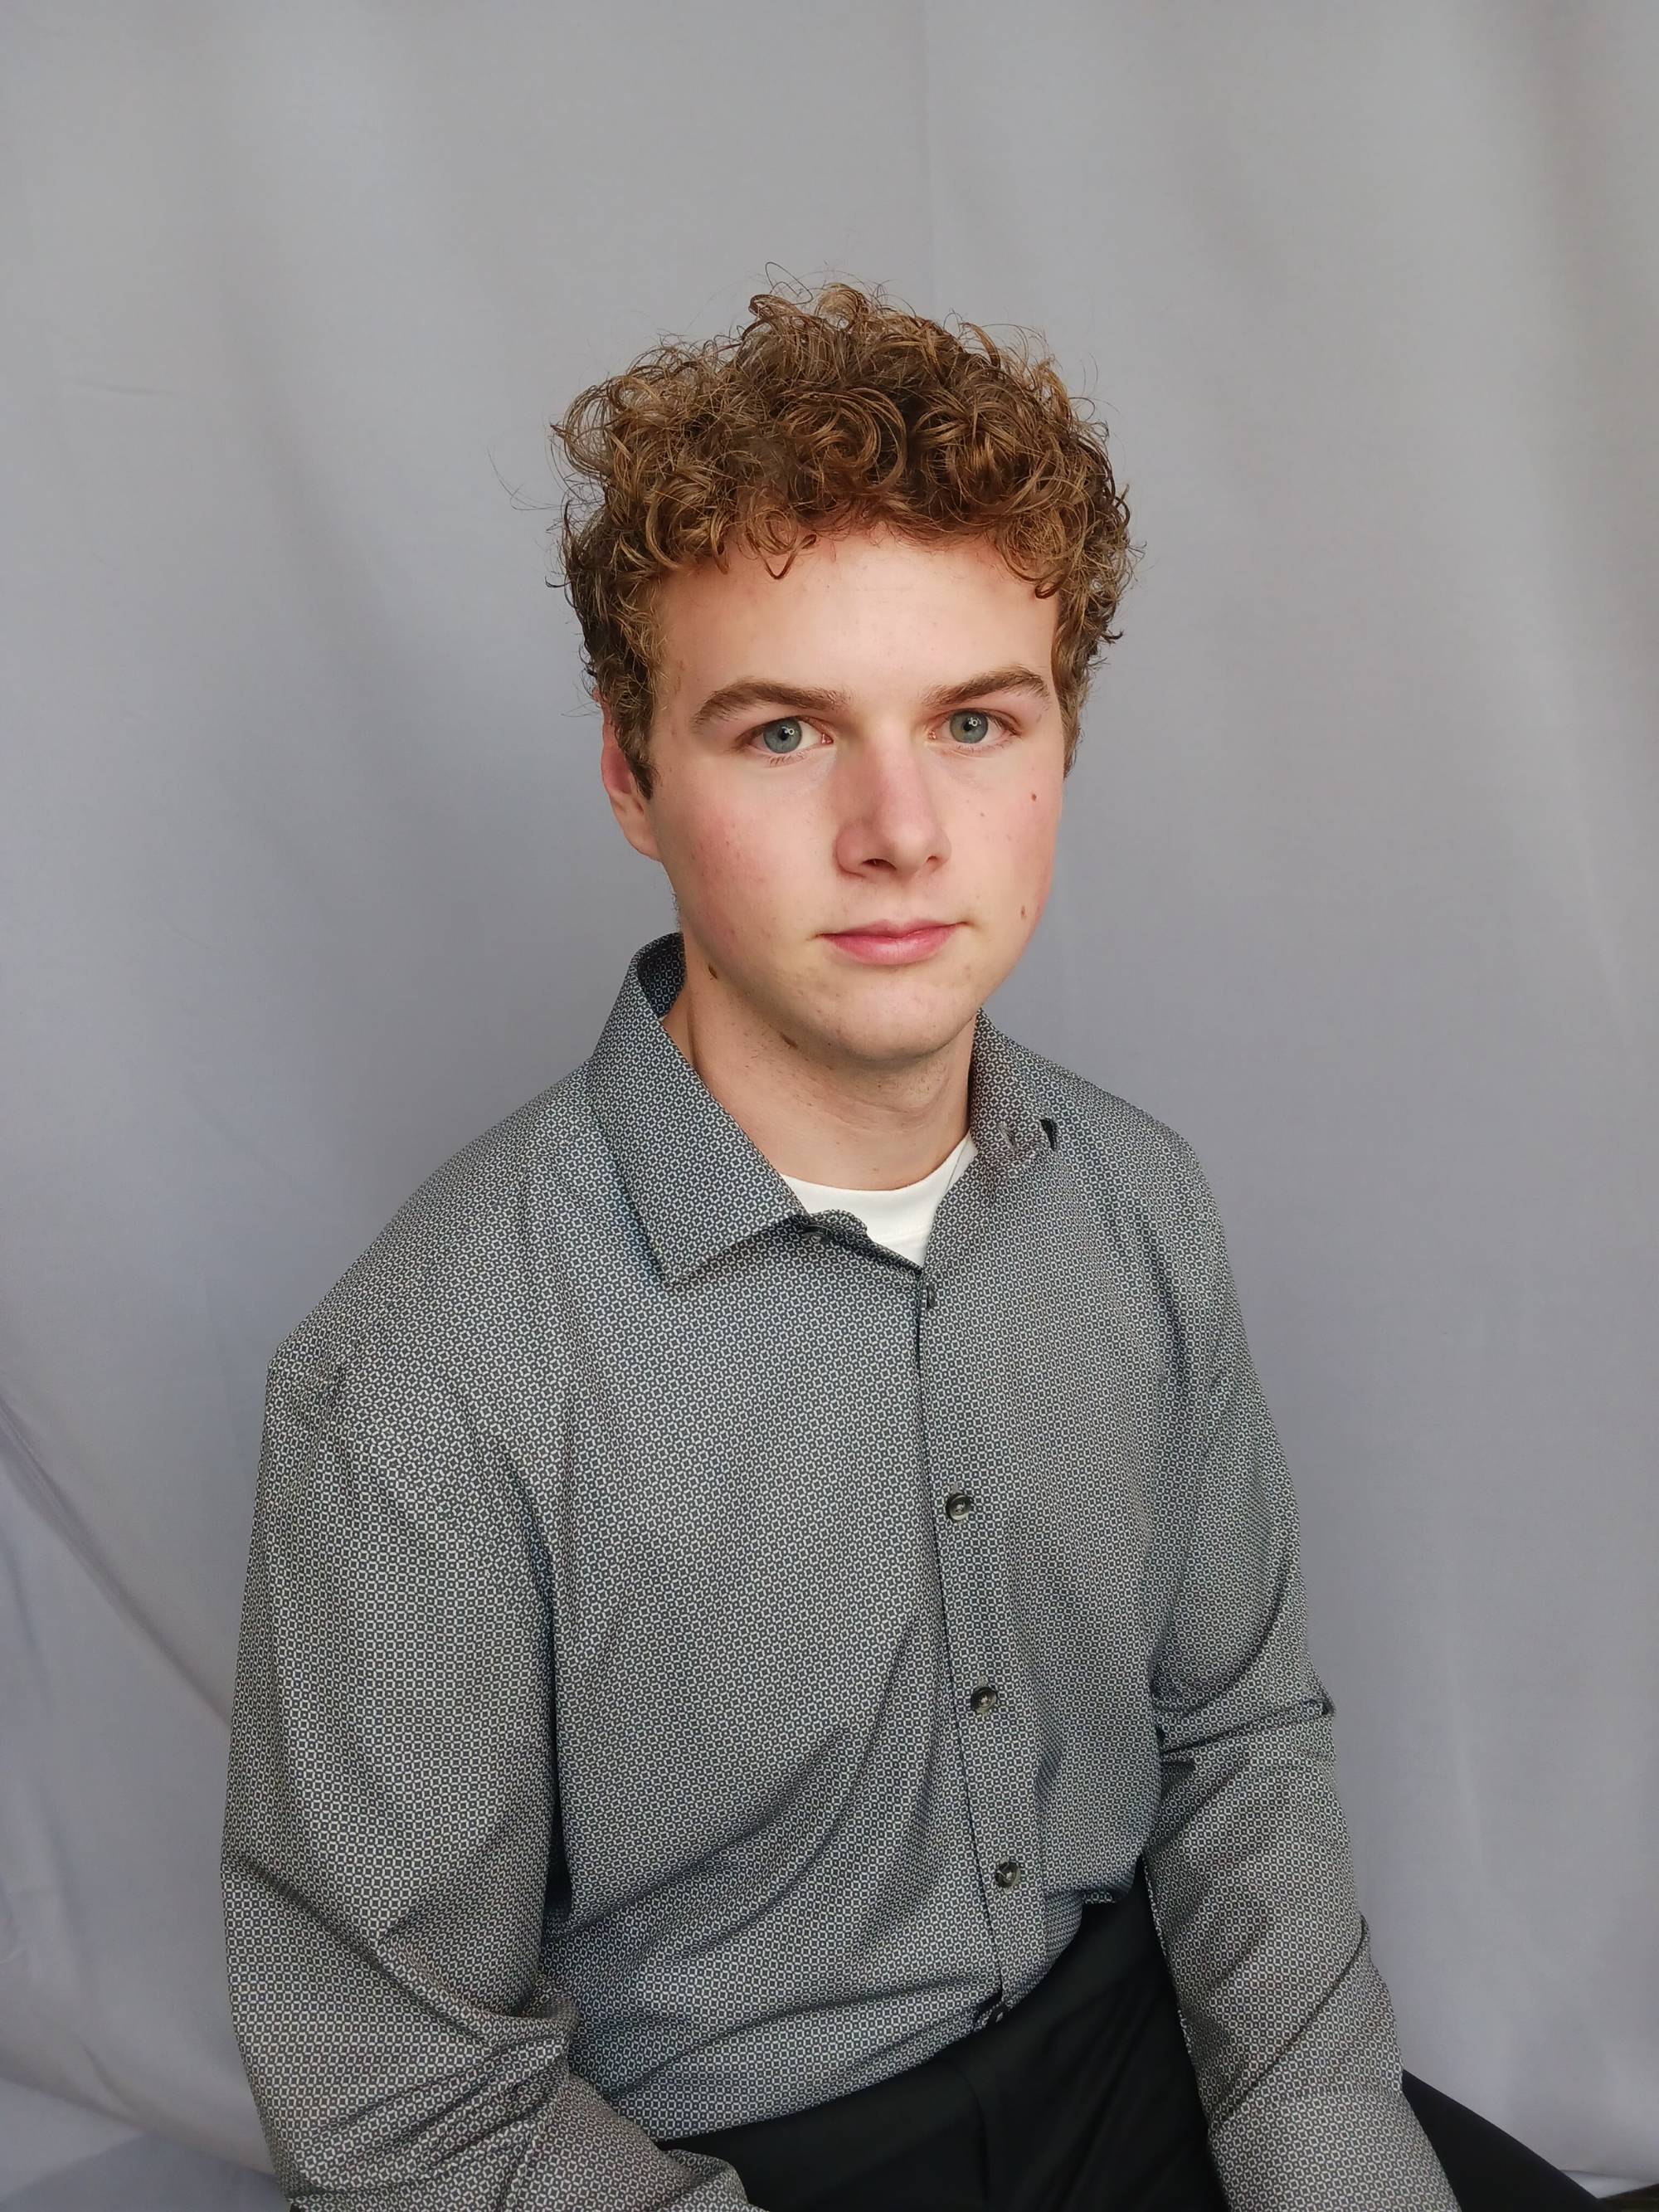 Young man with curly hair and a grey shirt looking at the camera